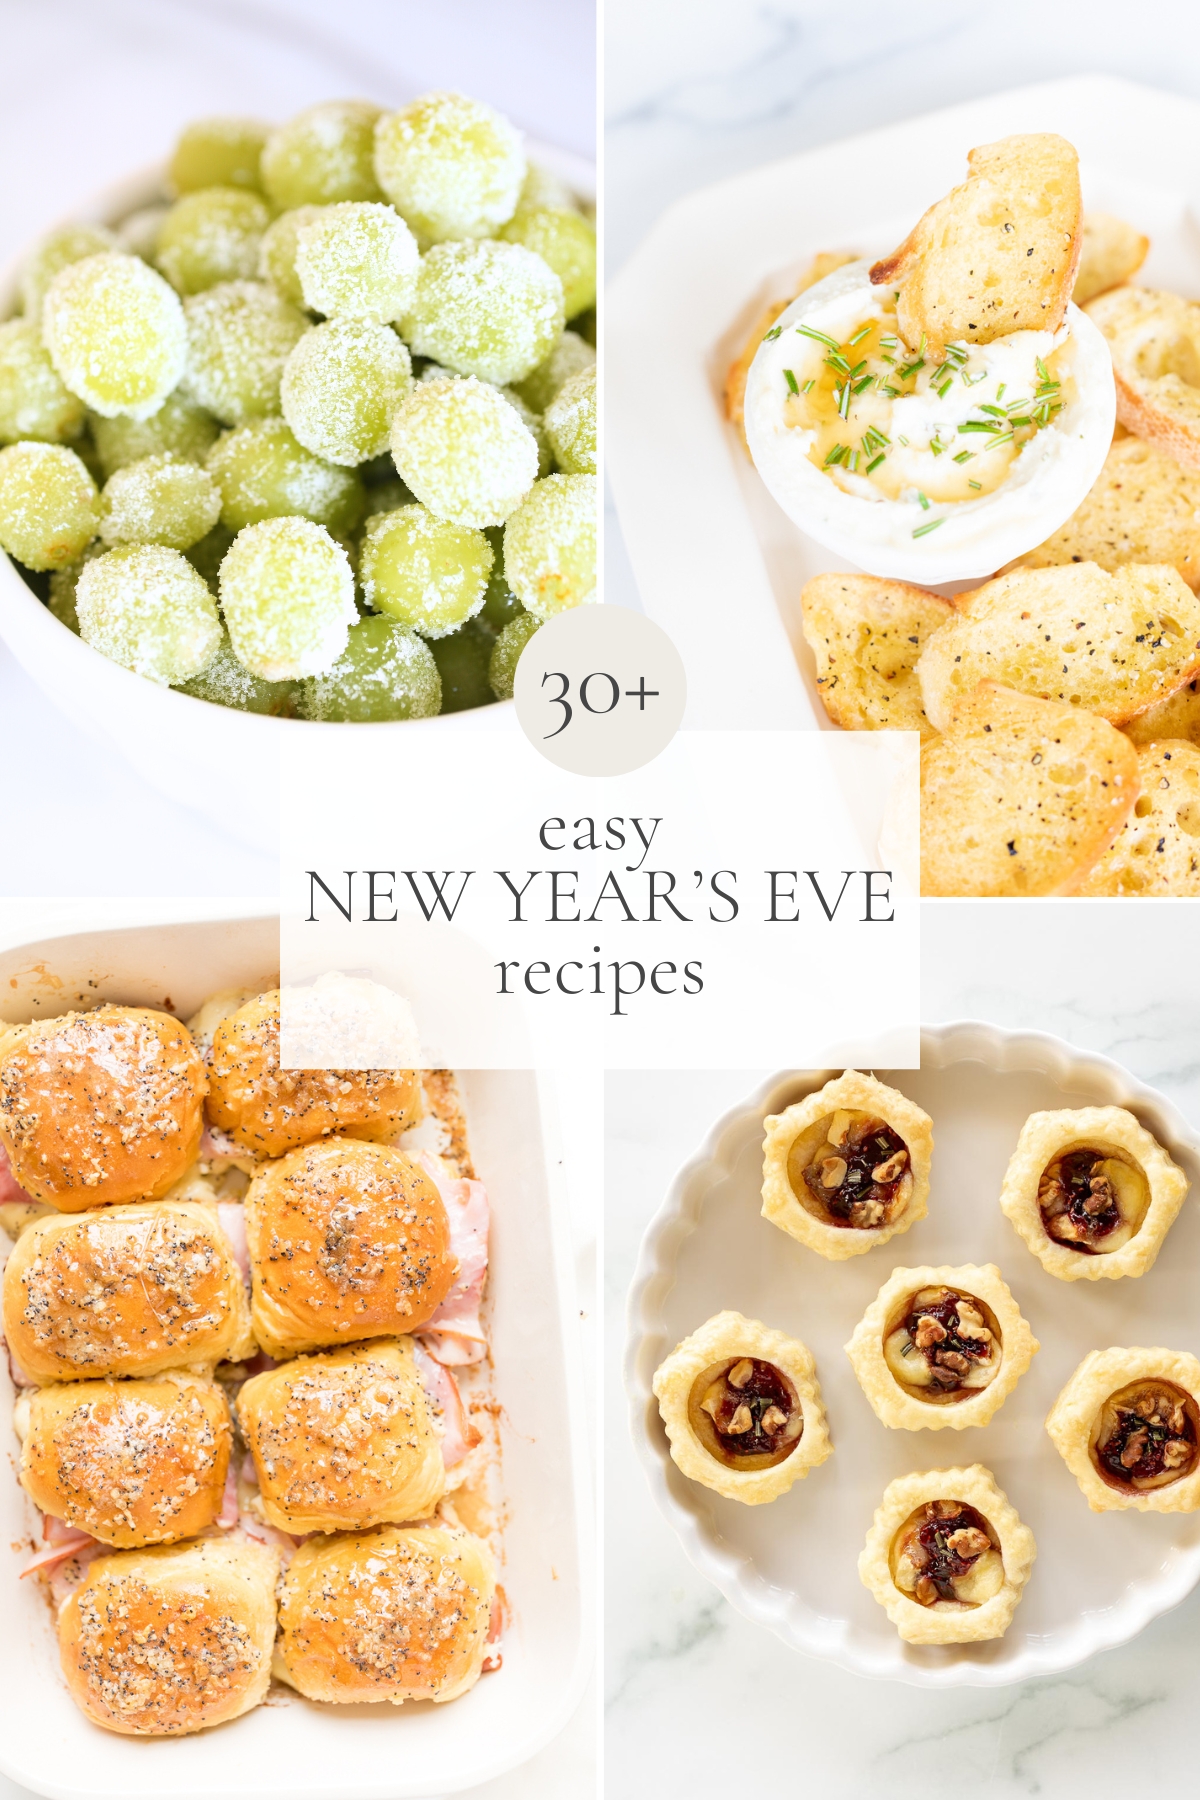 Gather a collection of delightful and appetizing New Year's Eve recipes to celebrate the arrival of the new year.